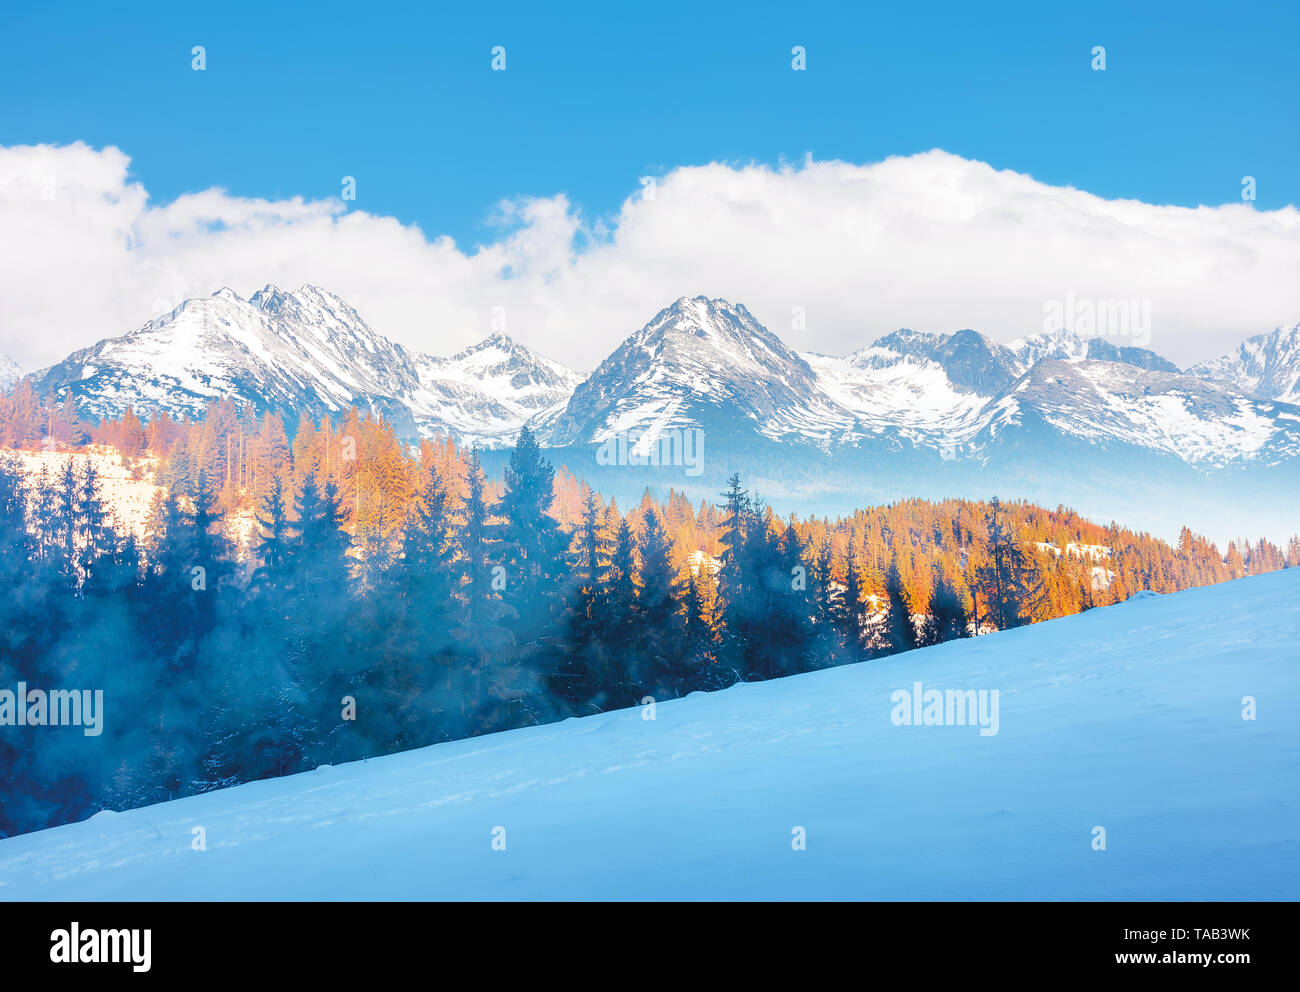 winter scenery in mountains. spruce trees on a snowy hill in evening light. snow capped ridge in the distance. hazy weather and cloudy sky. composite  Stock Photo